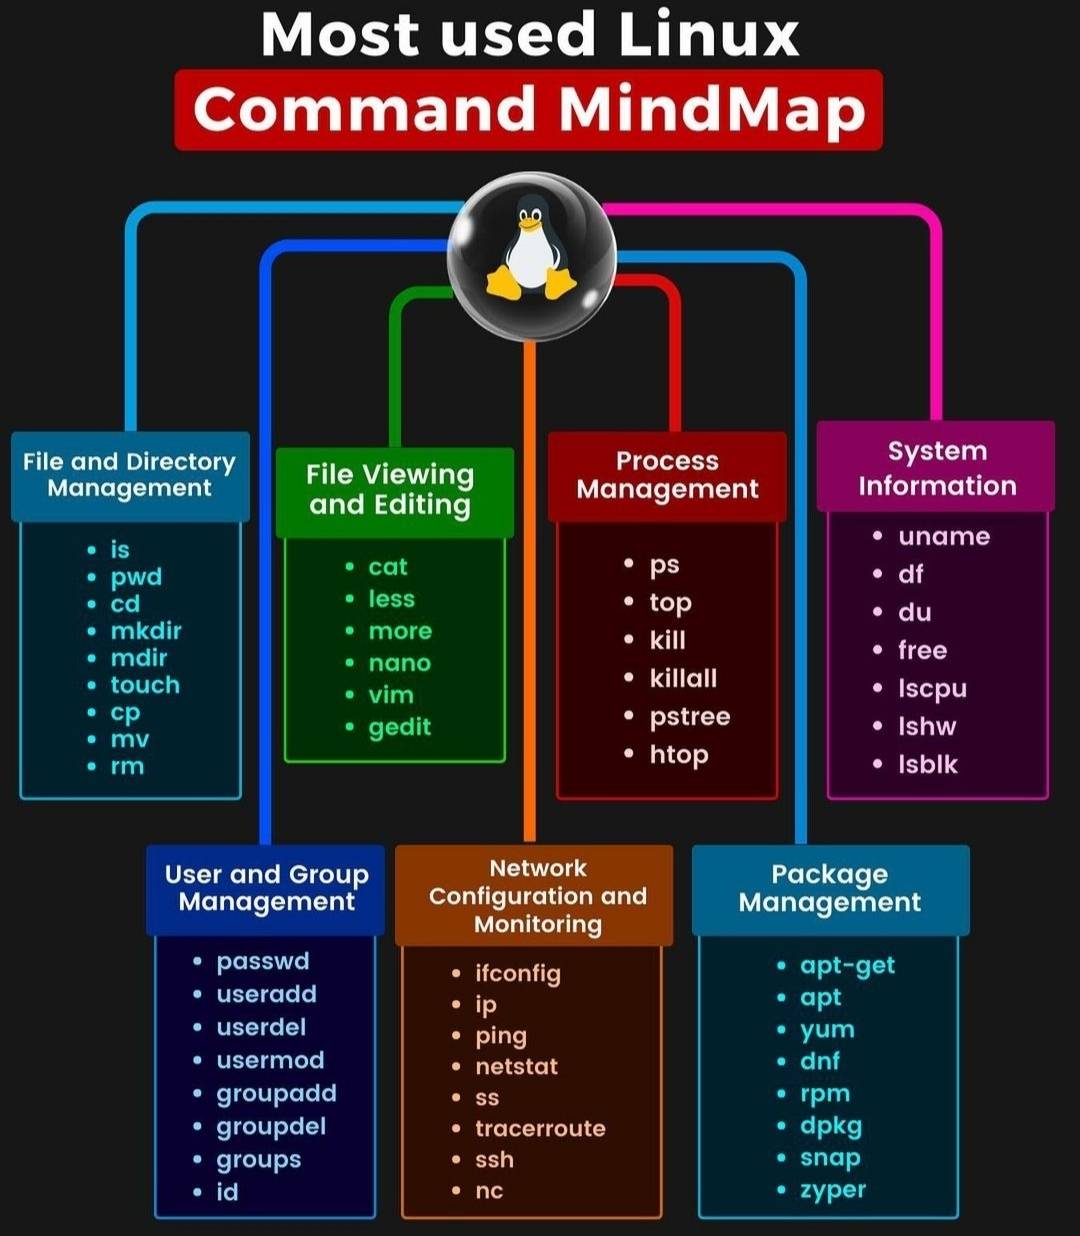 Most used Linux Command MindMap